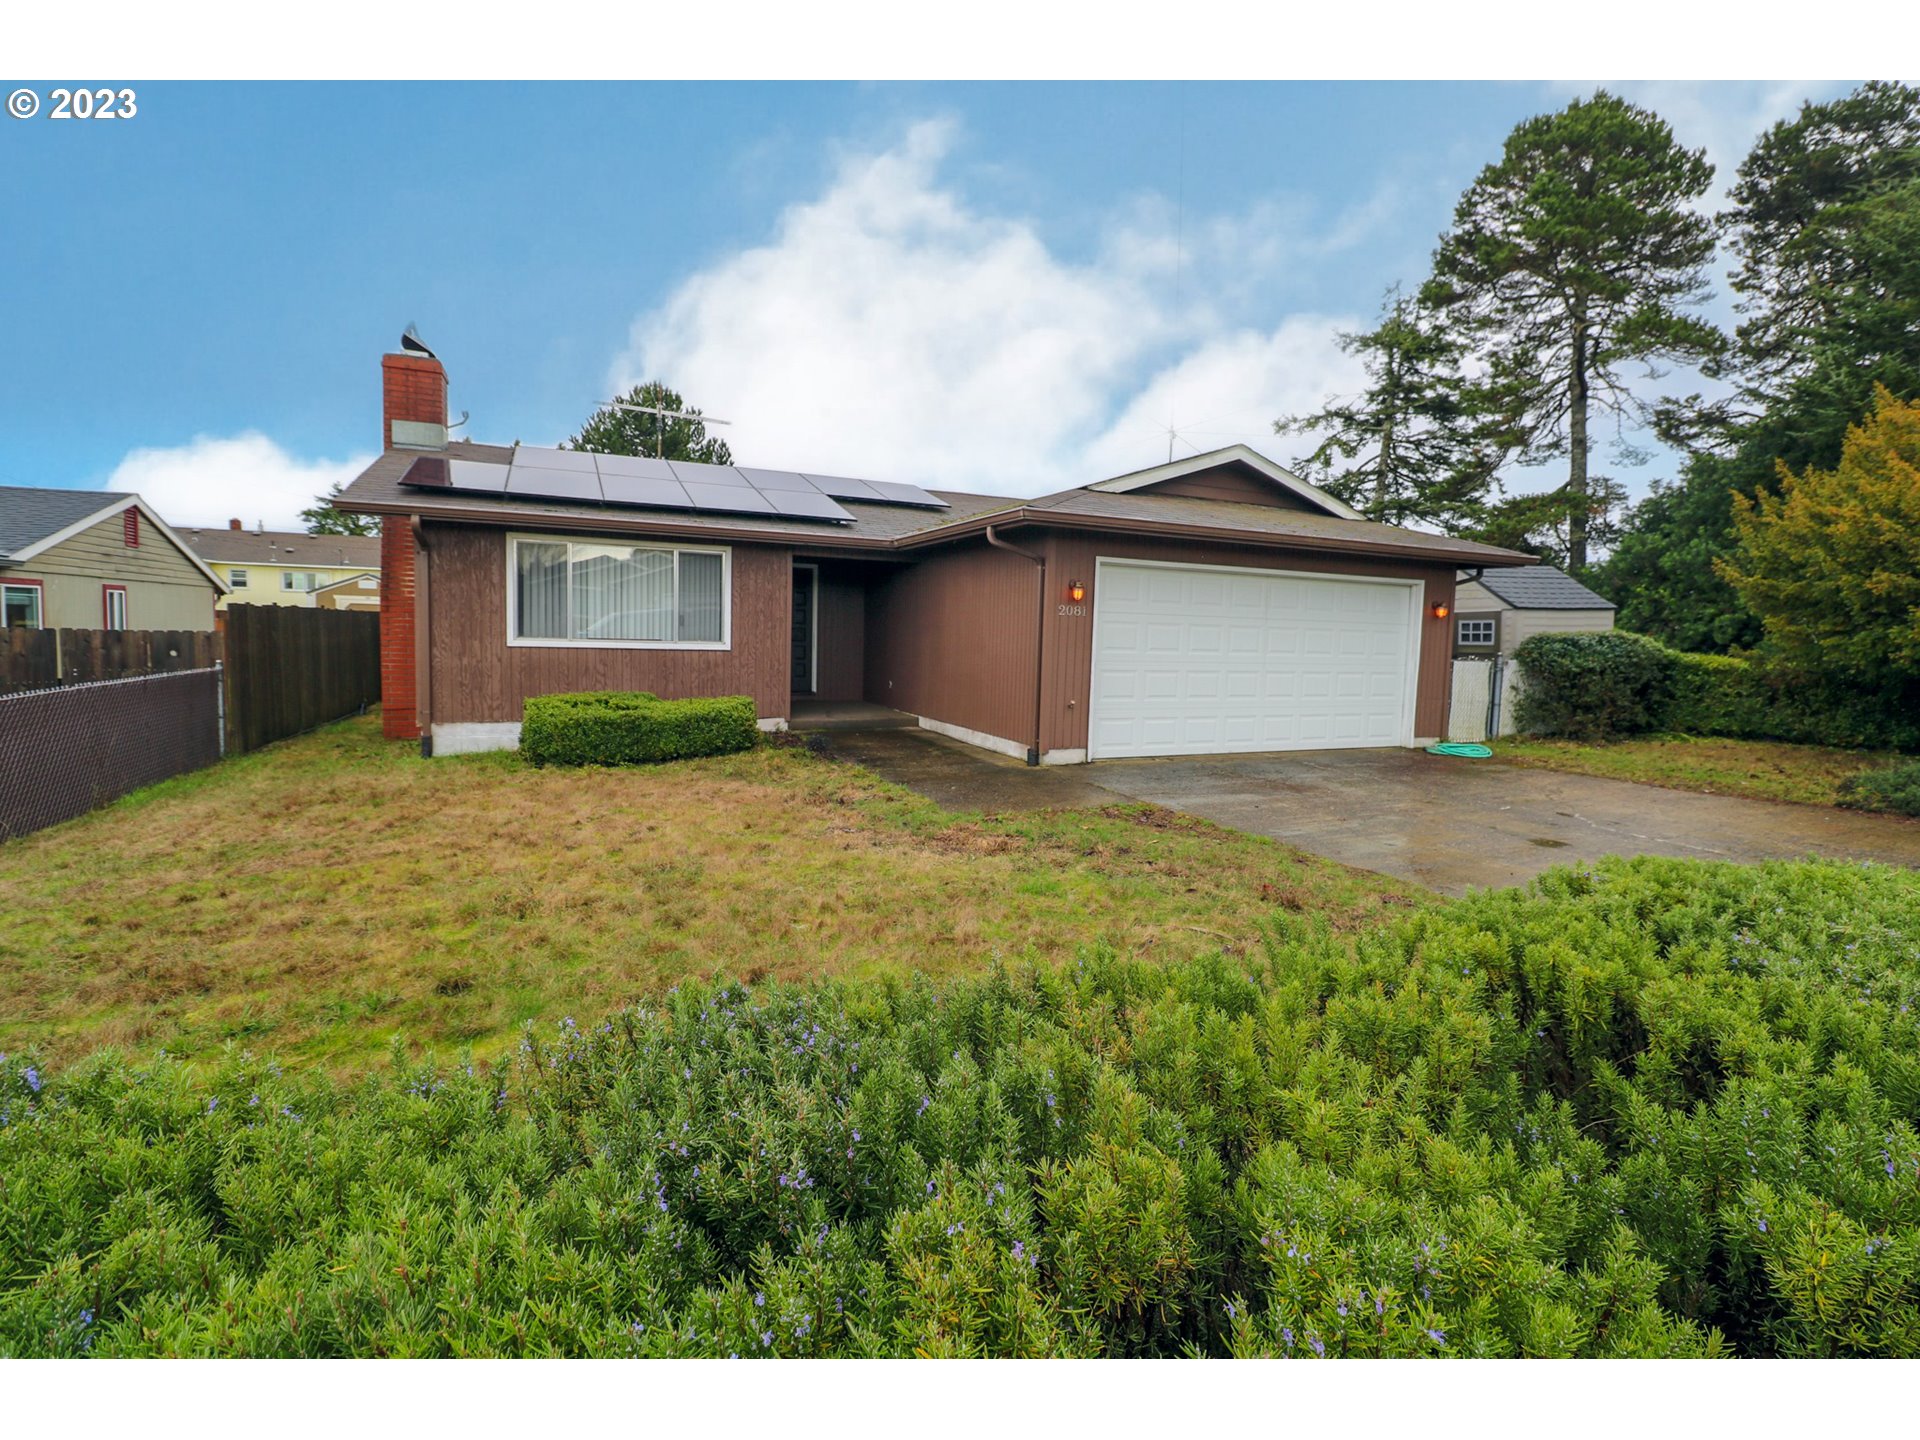 2081 GRANT, North Bend, OR 97459